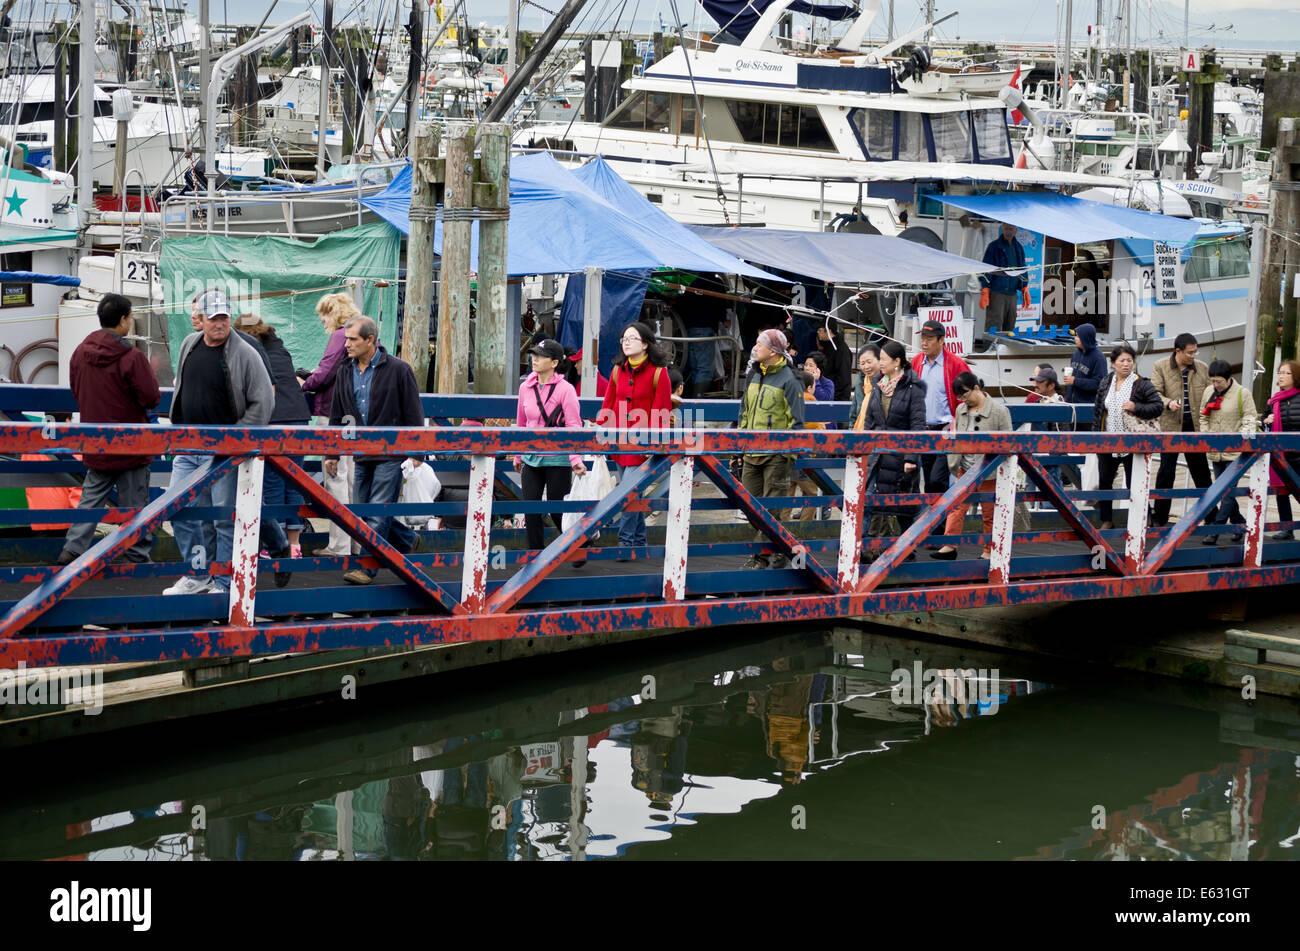 People walking up the ramp from the fresh fish market at on the docks at Fisherman's Wharf in Steveston, BC, Canada. Stock Photo